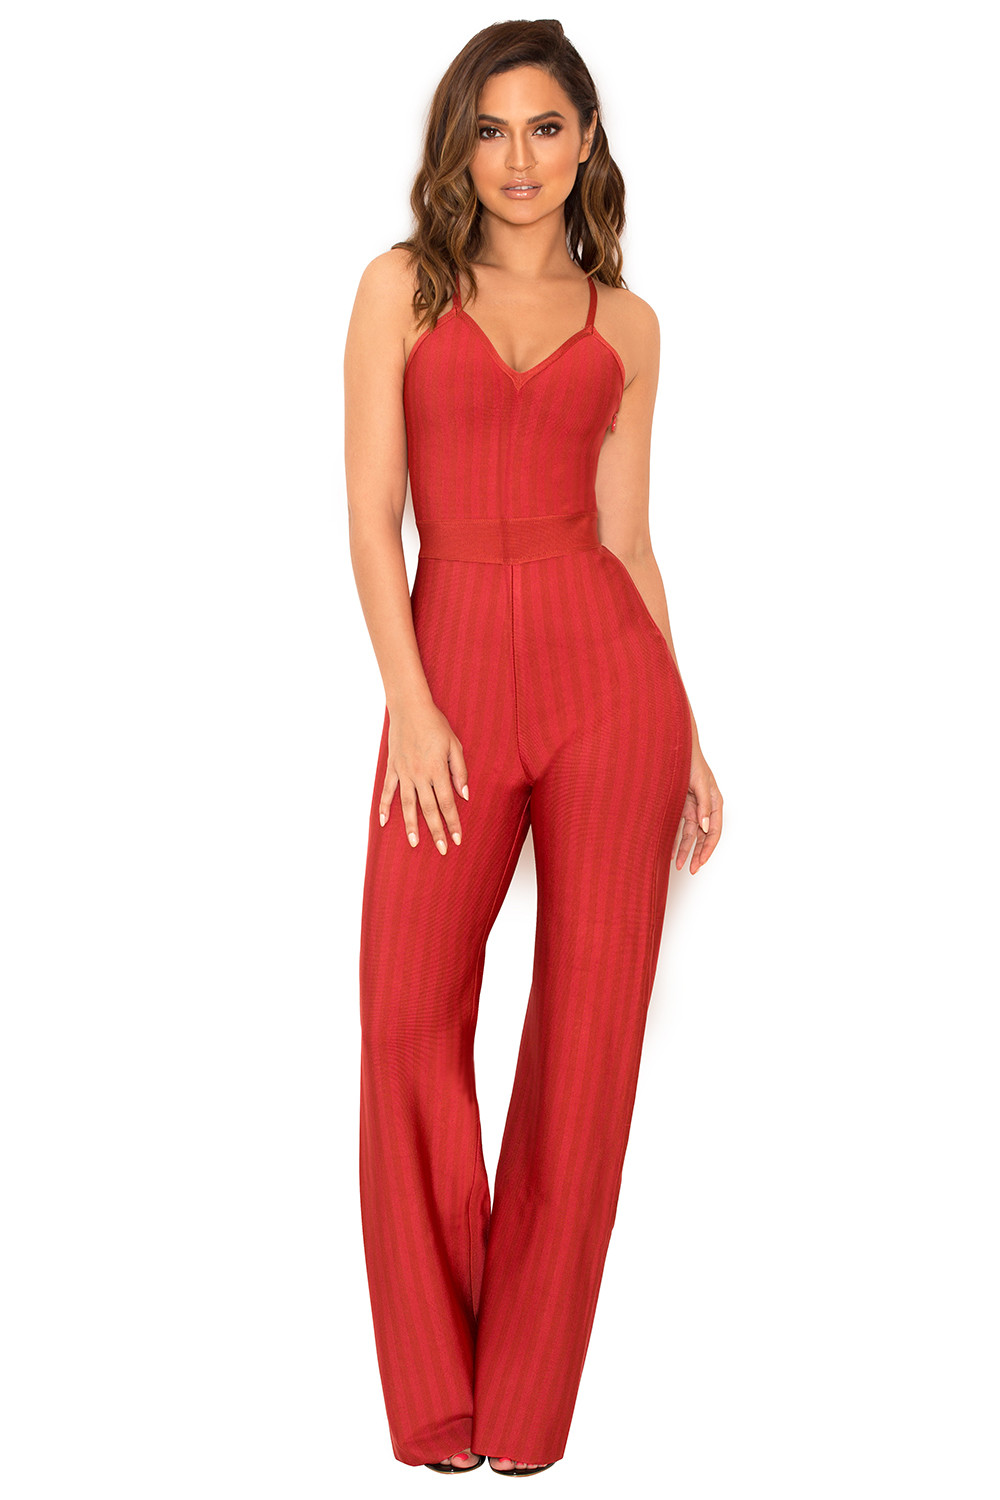 'Devi' Red Strappy Bandage Jumpsuit